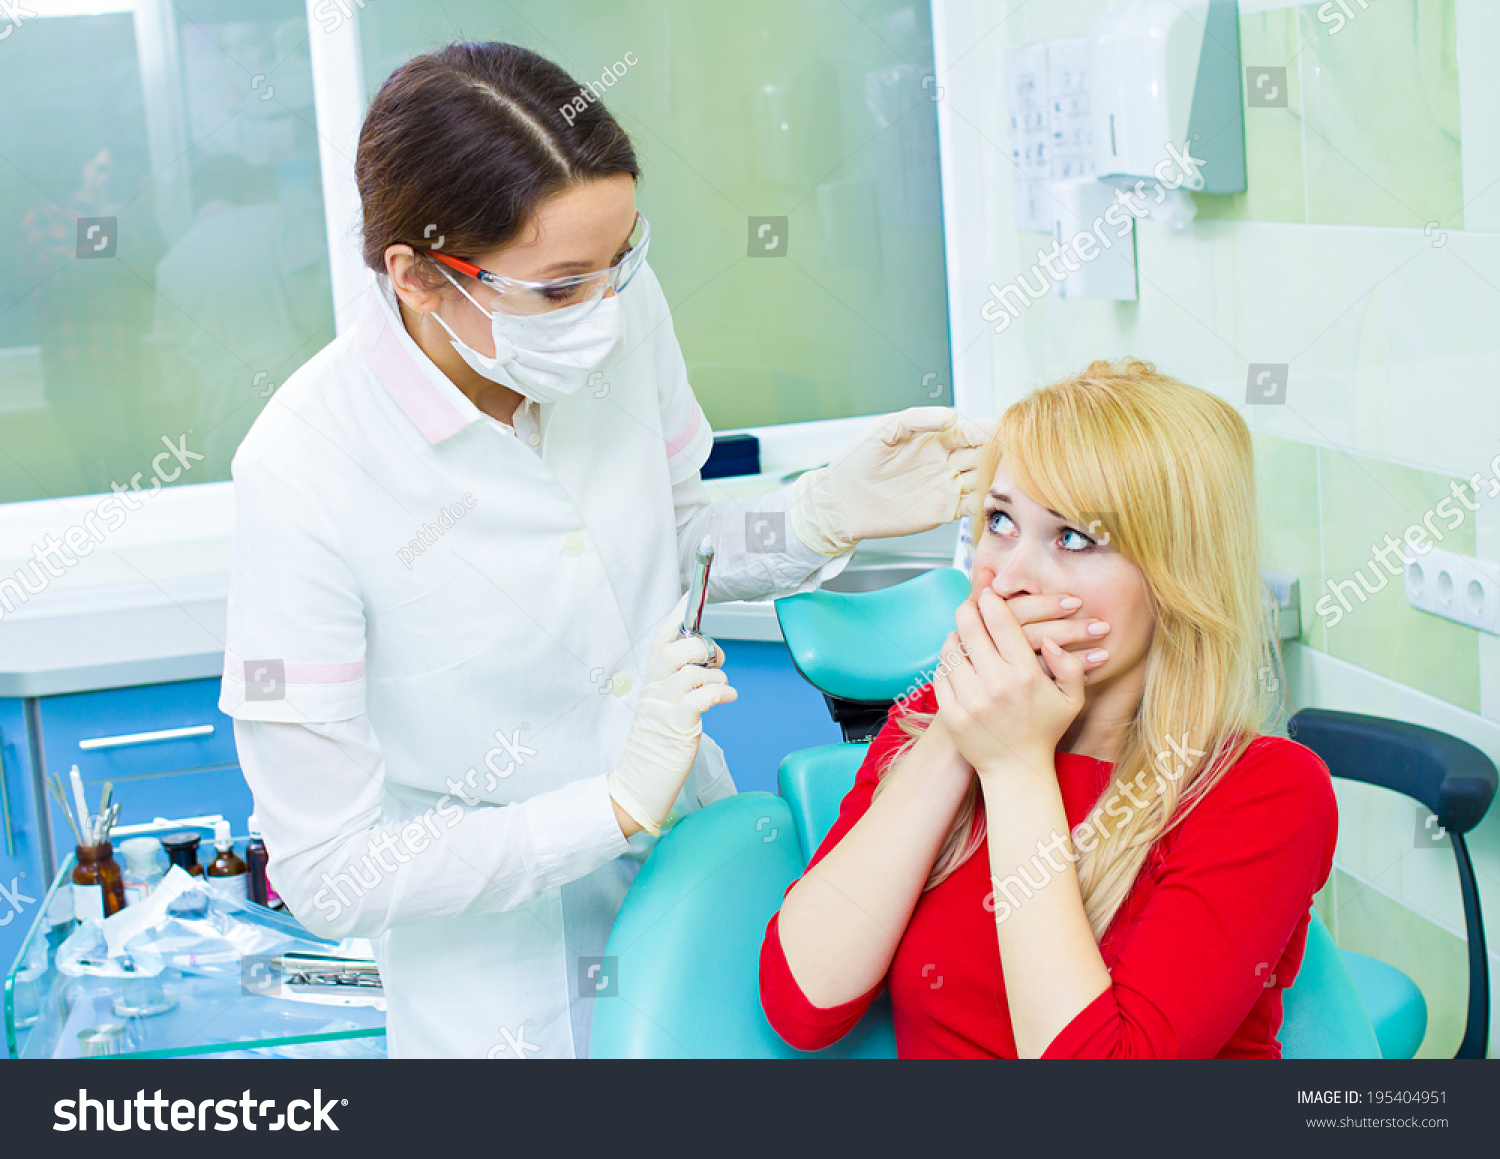 Closeup portrait young terrified girl woman scared at dentist visit, siting in chair, covering her mouth, doesn't want dental procedure, drilling, tooth extraction, isolated clinic office background #195404951